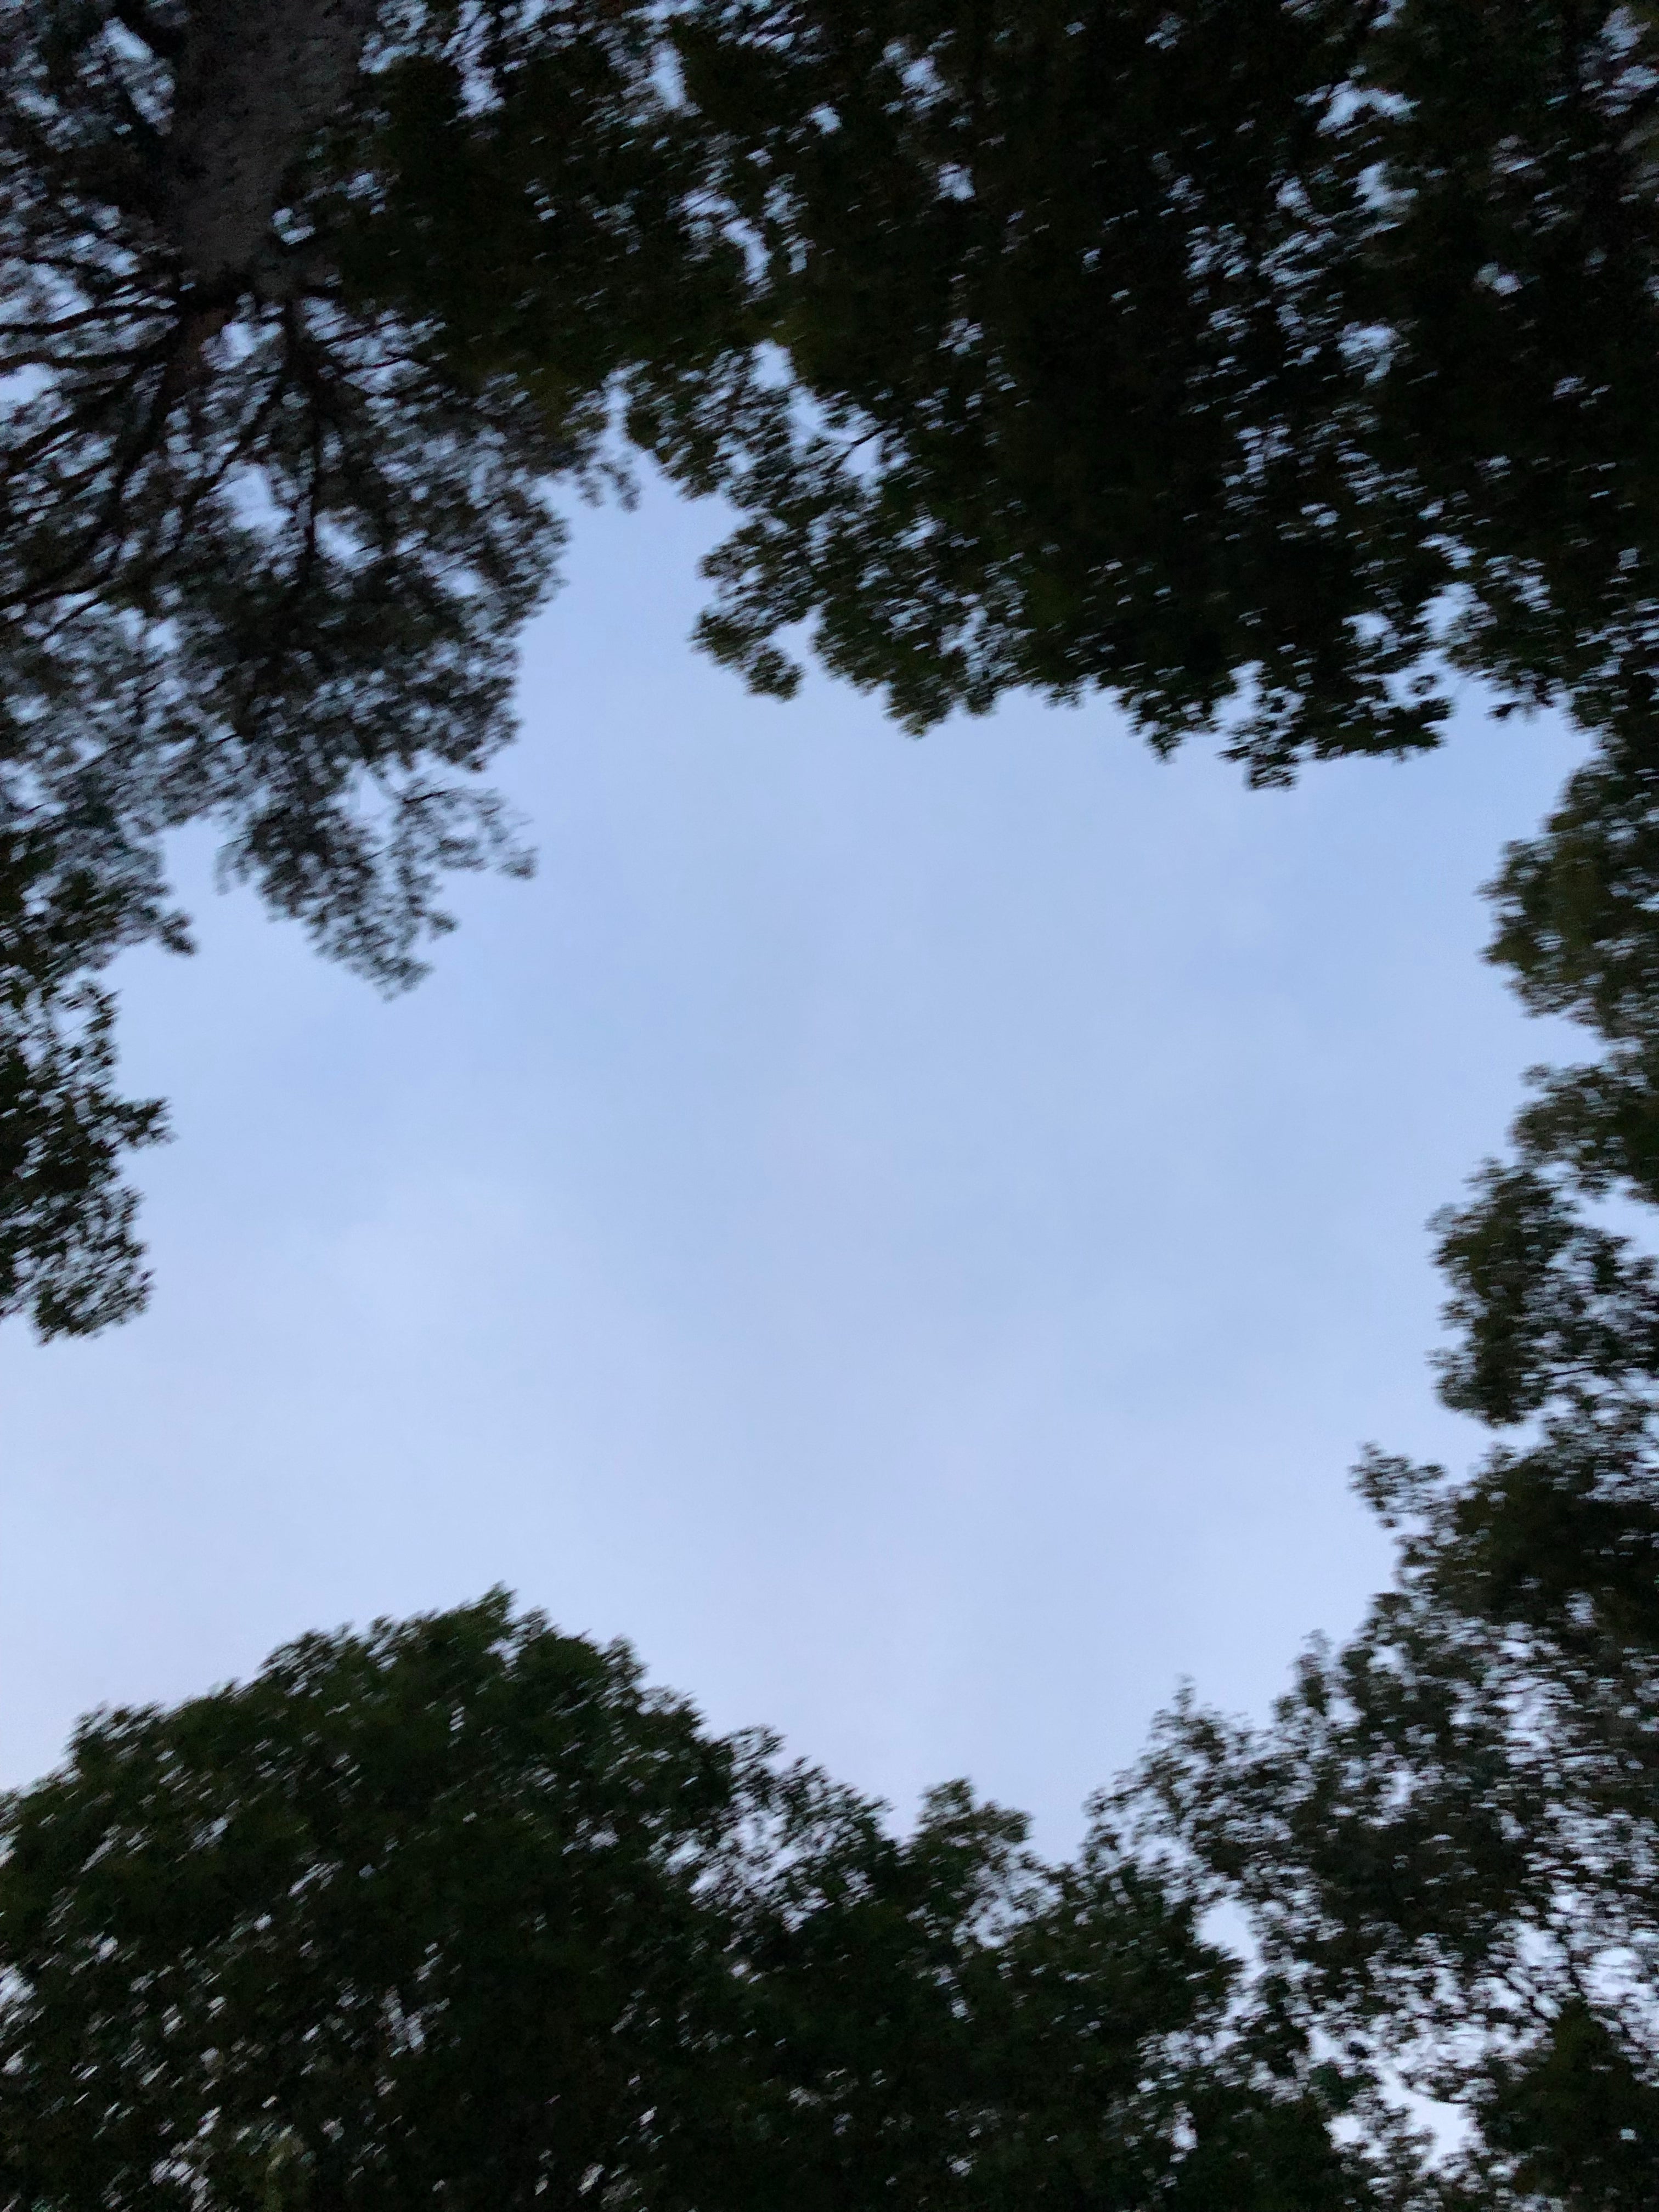 My view from my hammock. Waiting on night to see the stars.